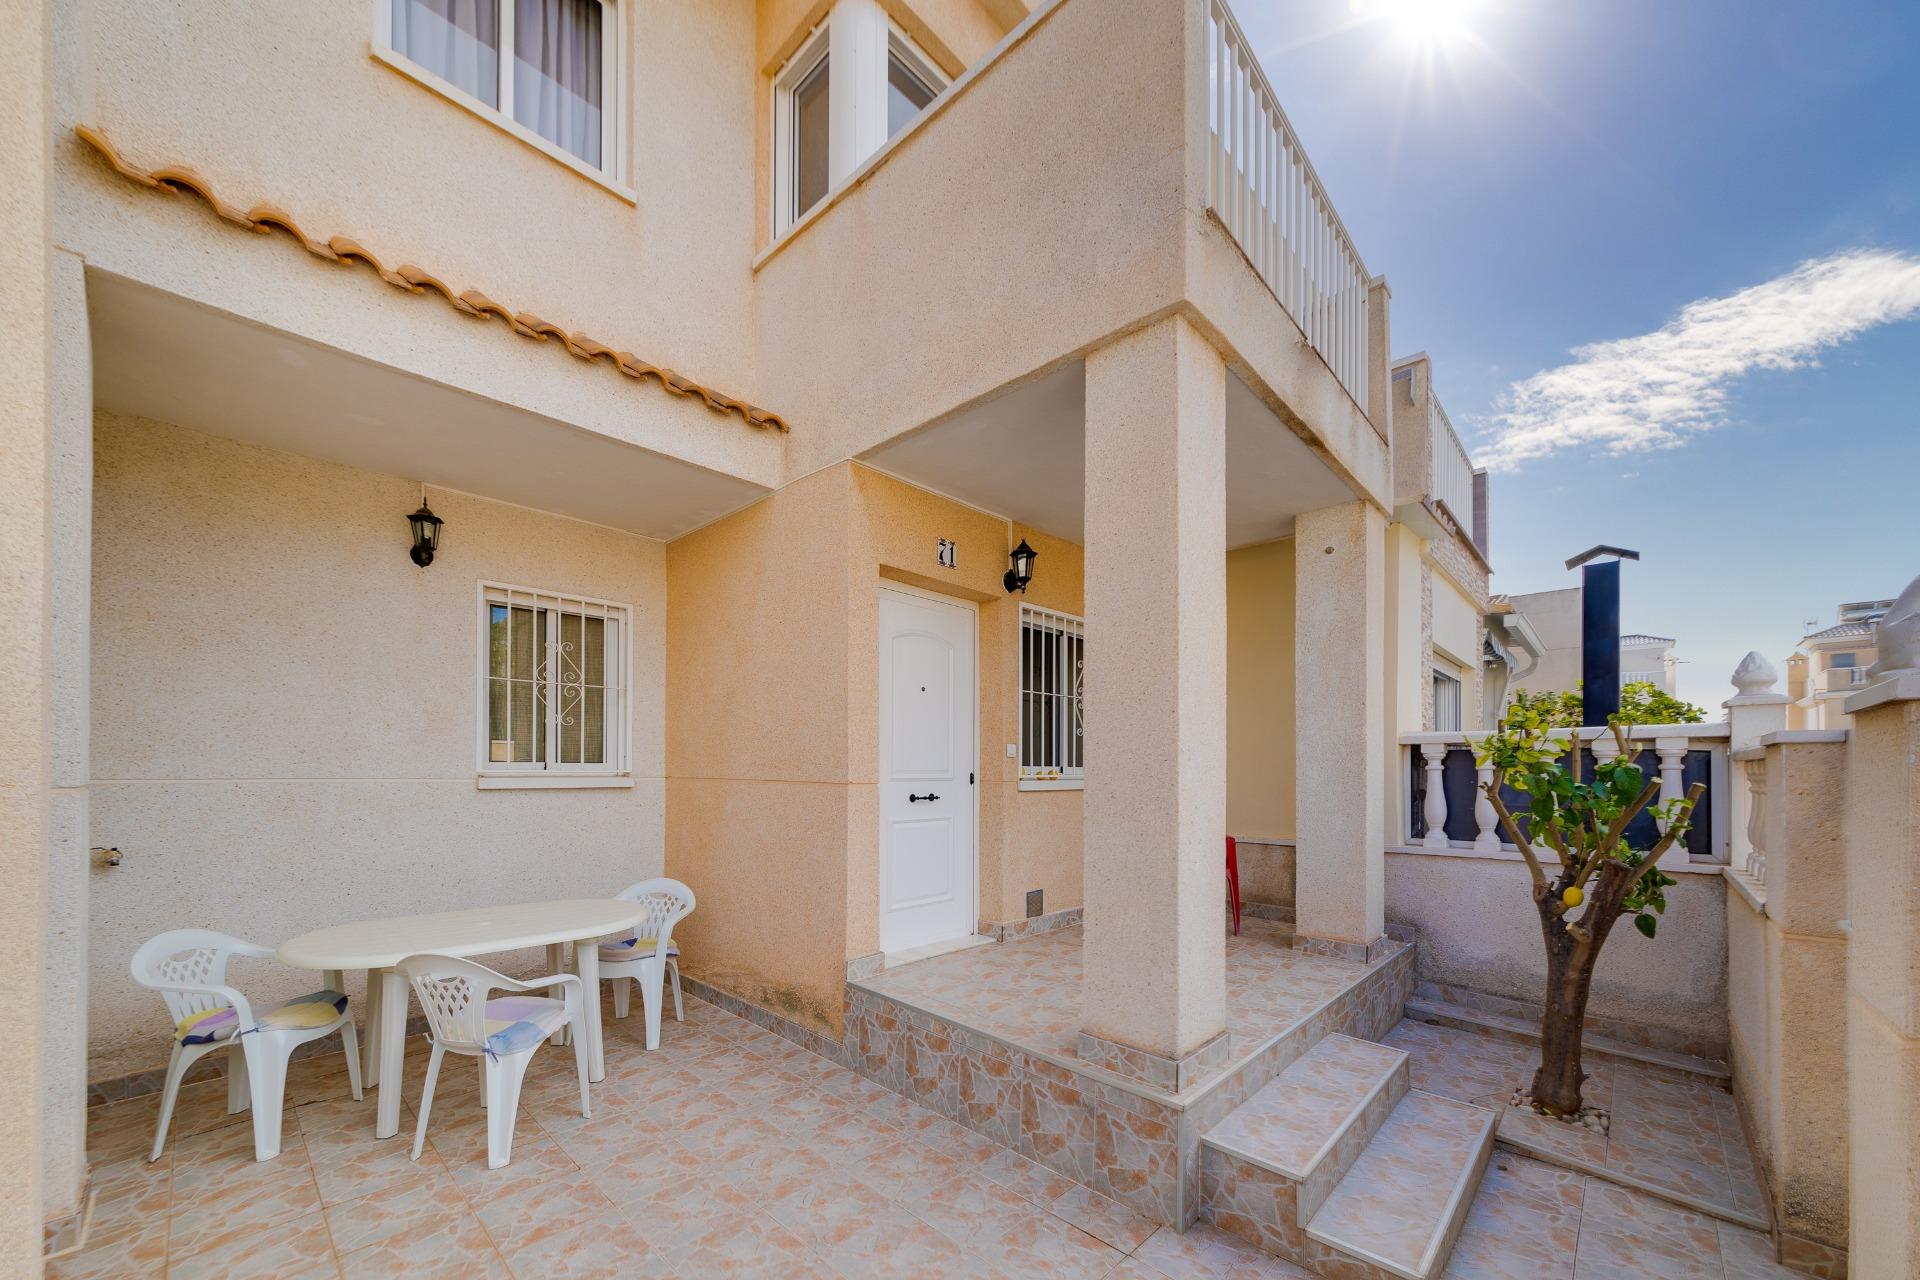 Cozy townhouse for sale in Aguas Nuevas, Torrevieja.